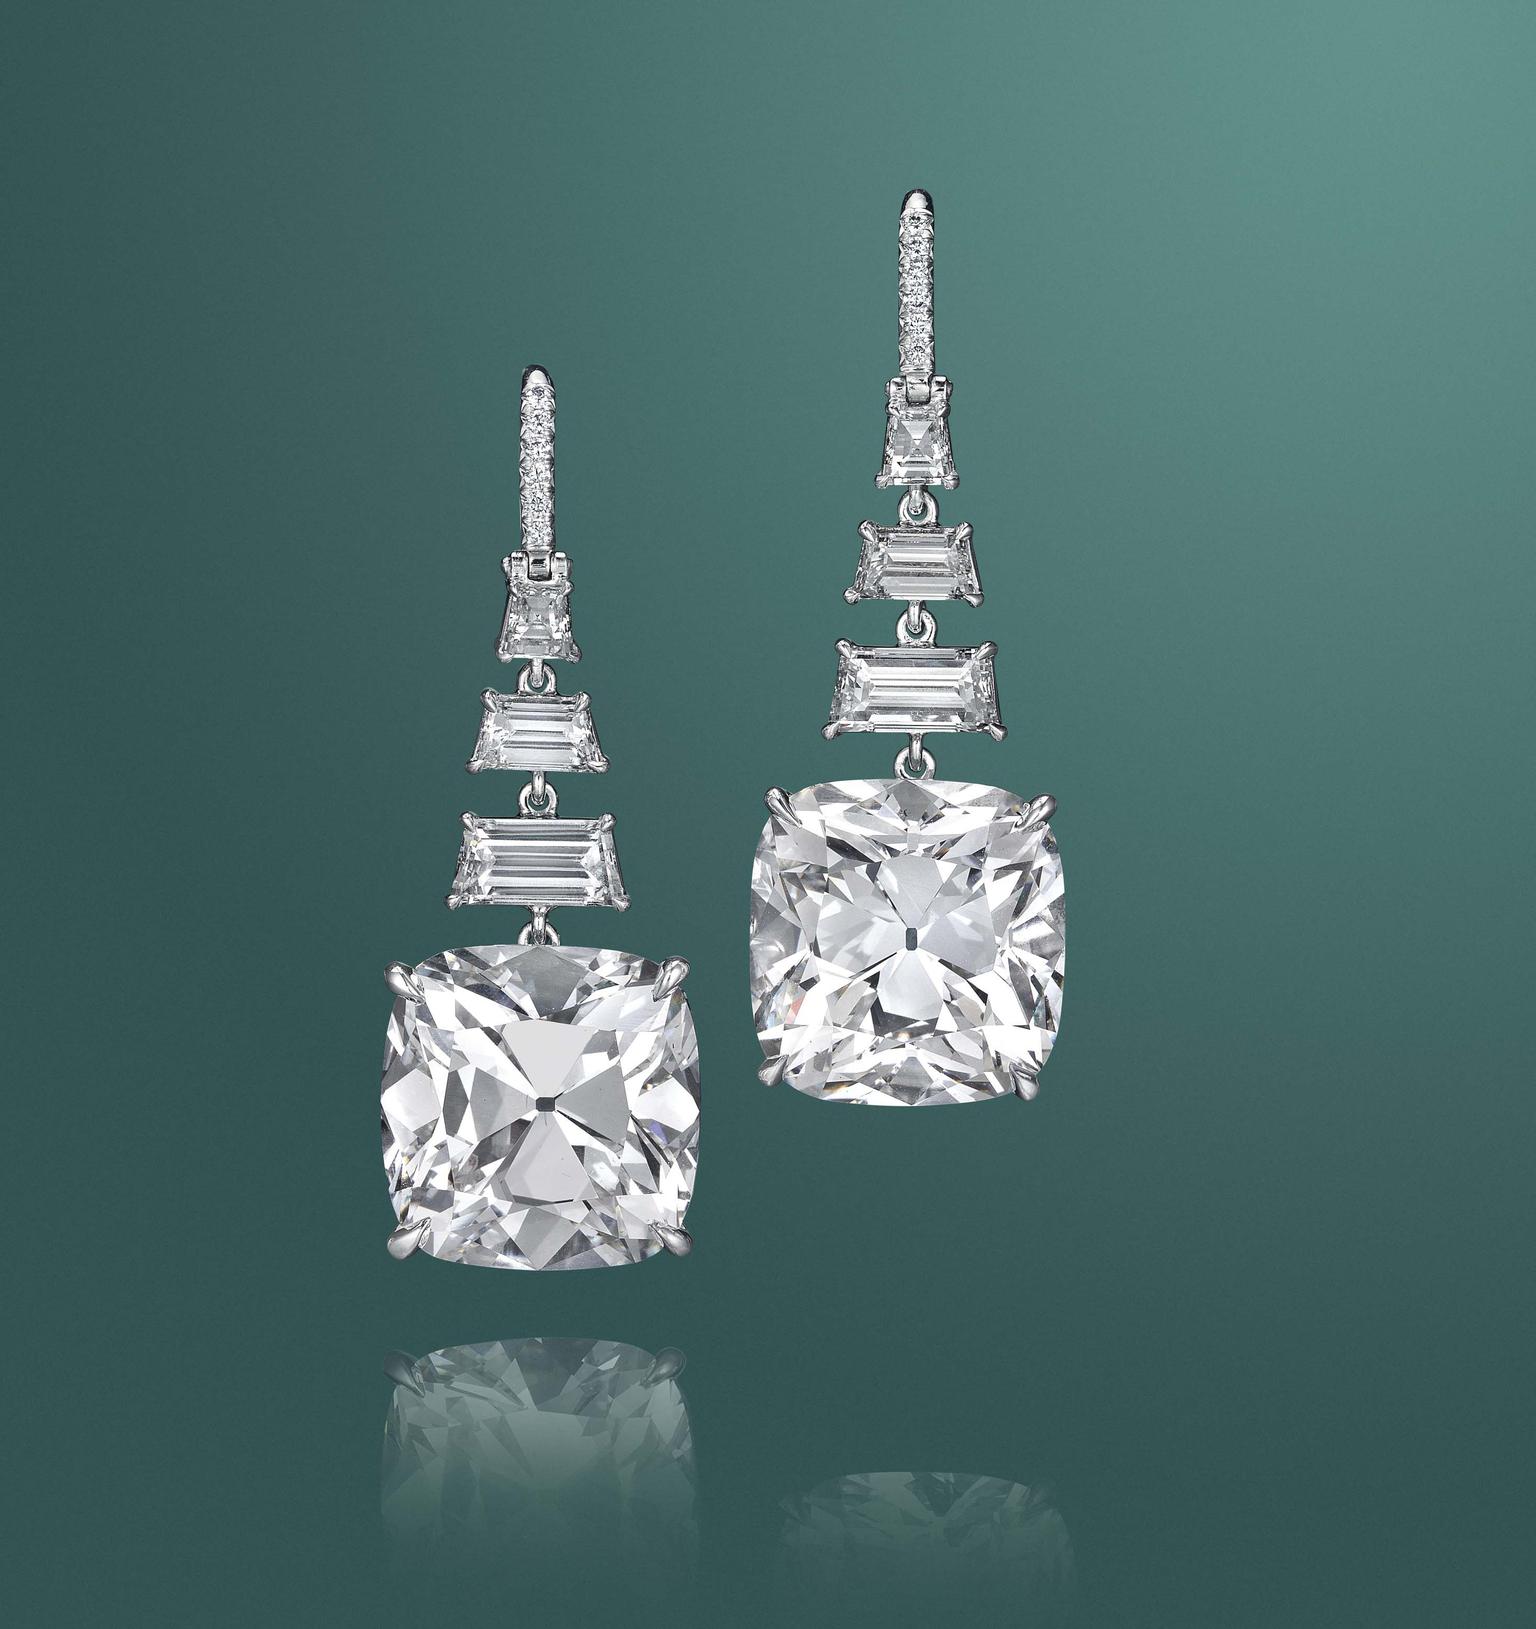 Diamonds are always among the top lots at Christie's Magnificent Jewels sales and this pair of  cushion-cut drop earrings were a highlight at the New York auction.